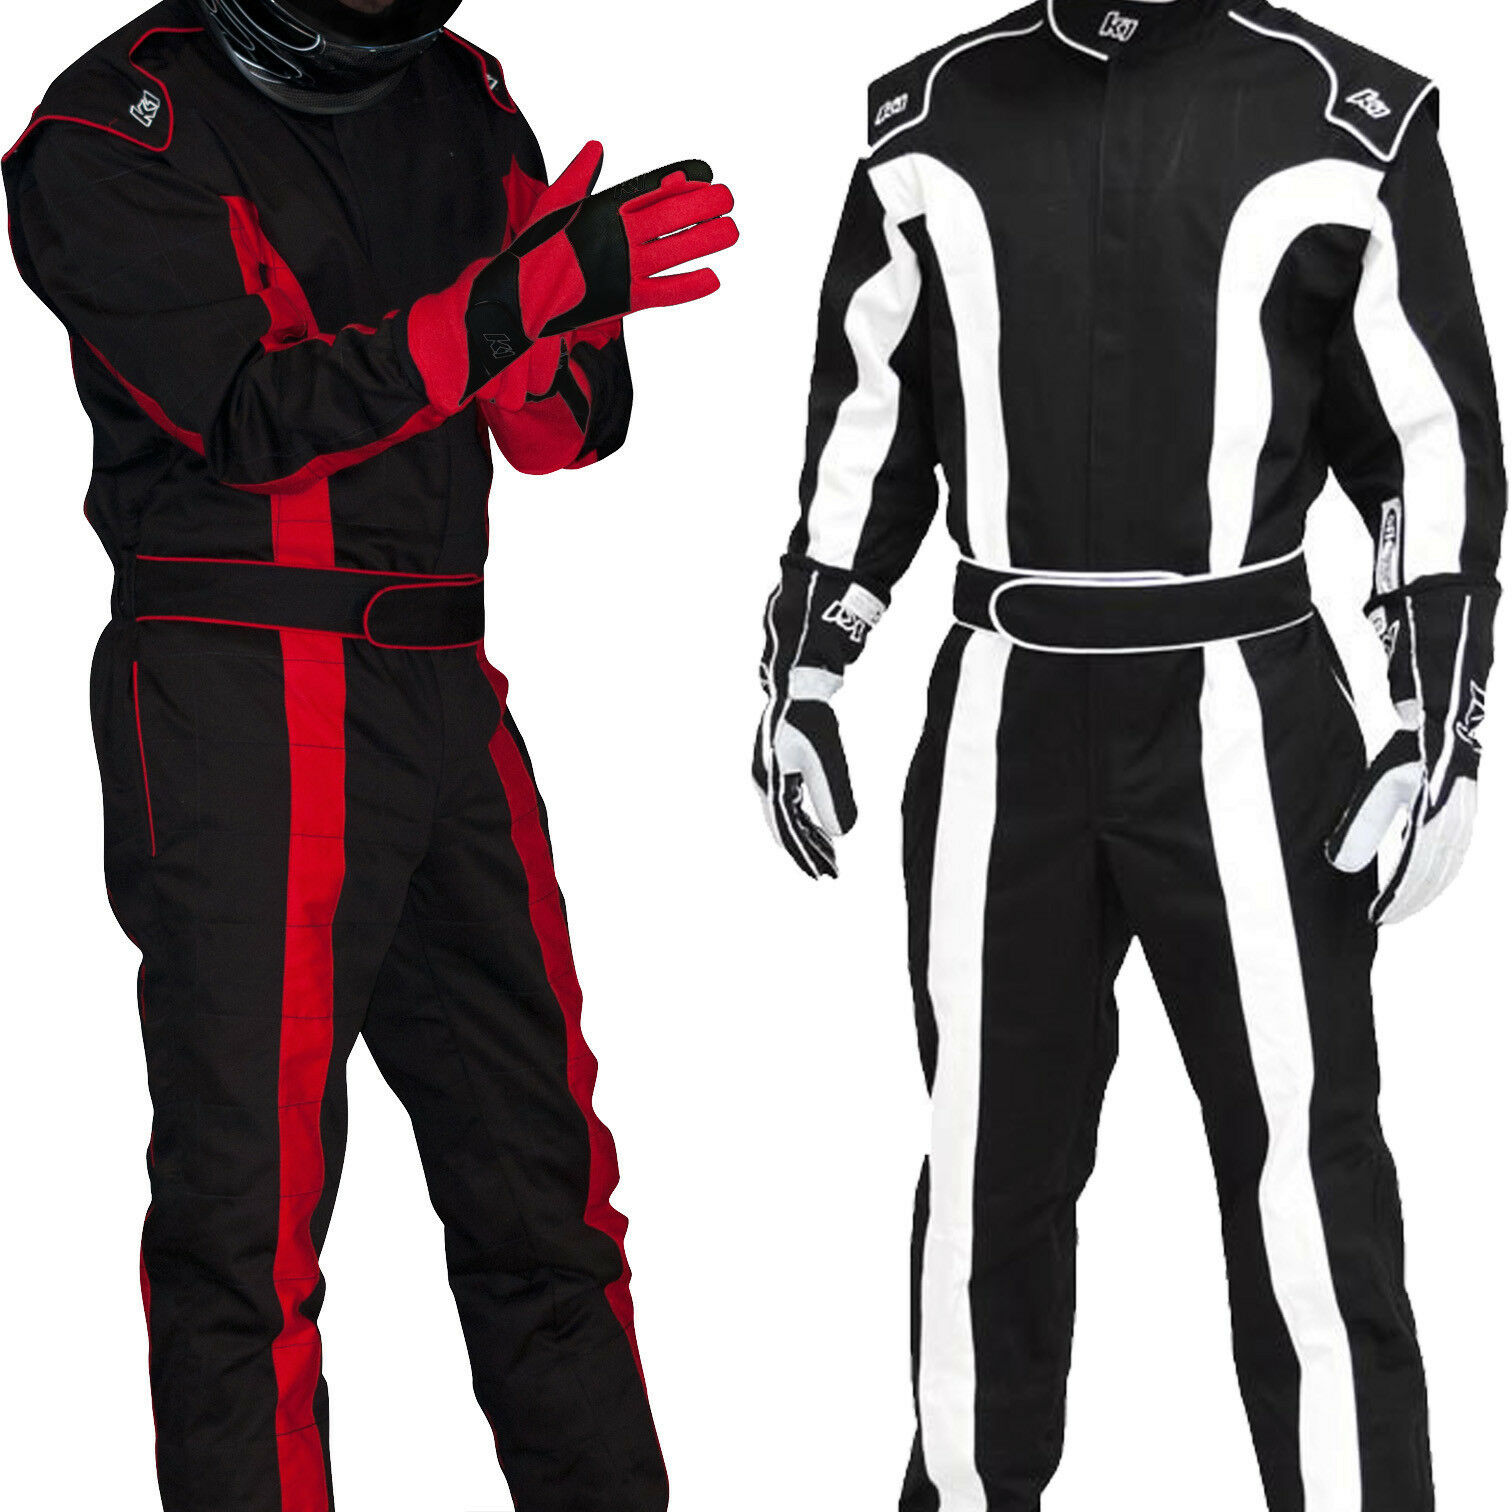 K1 - Tr2 Triumph Sfi-1 Auto Racing Suit - Nomex Style Fire - Sfi 3.2a/1 Rated